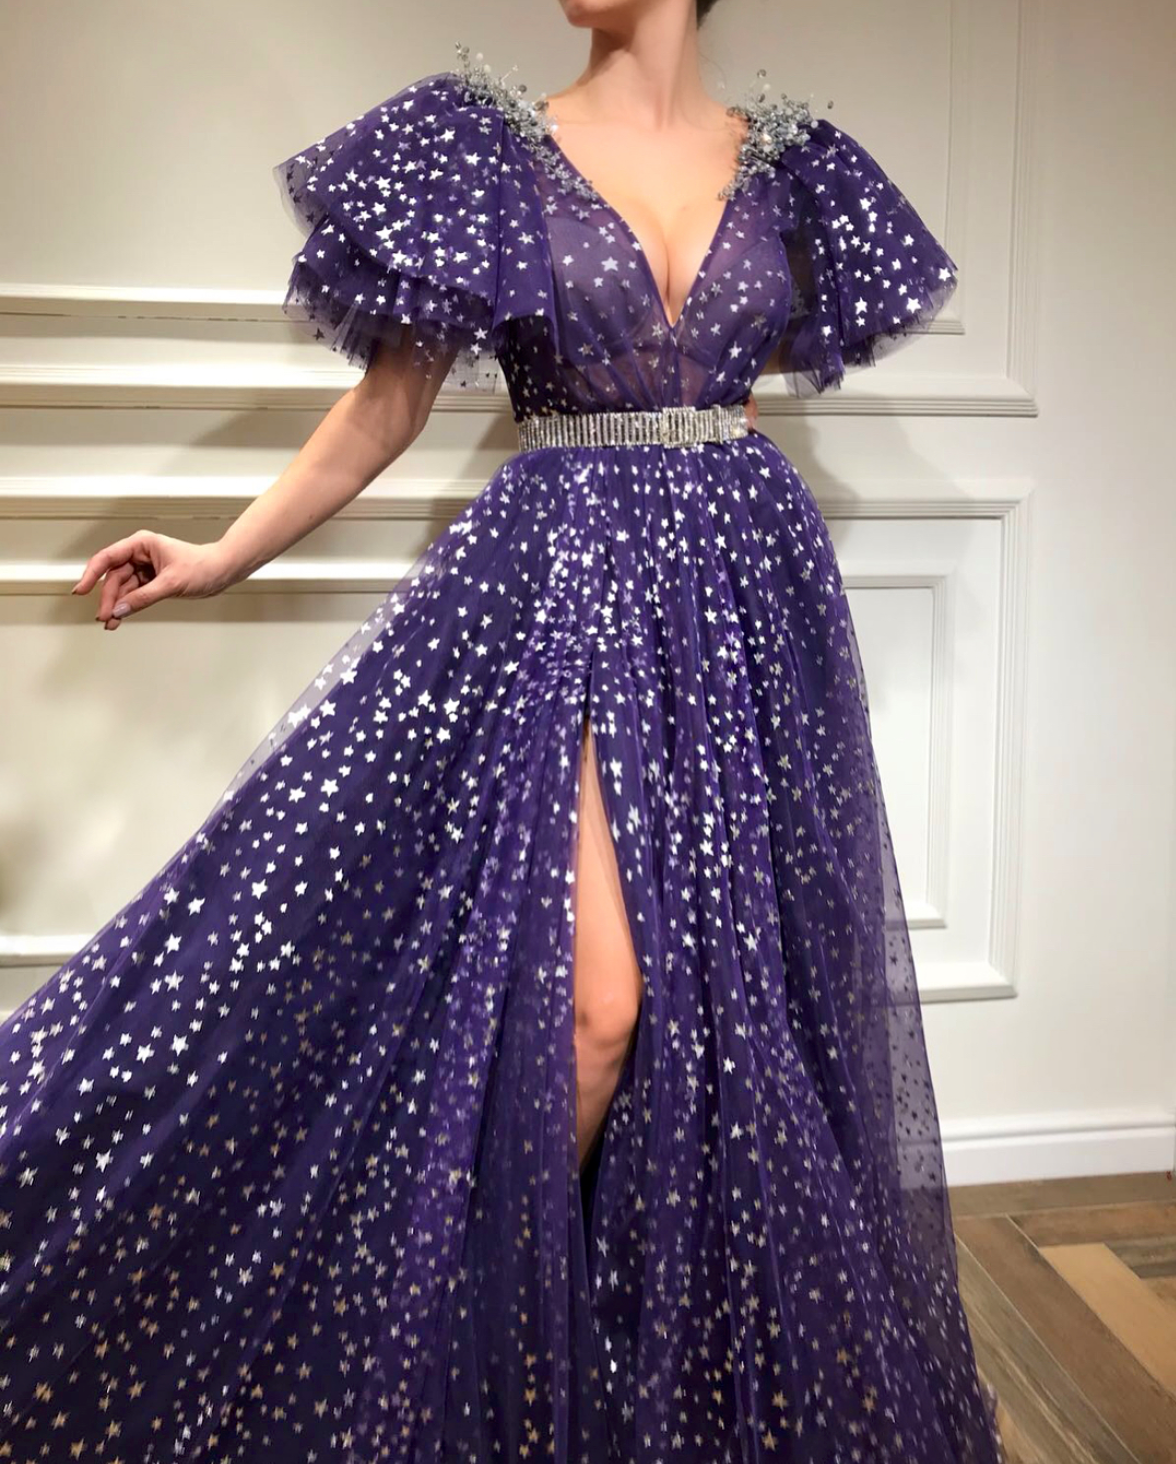 Gown - Teuta Matoshi DuriqiPurple A-Line dress with belt, v-neck, starry fabric, embroidery and short sleeves